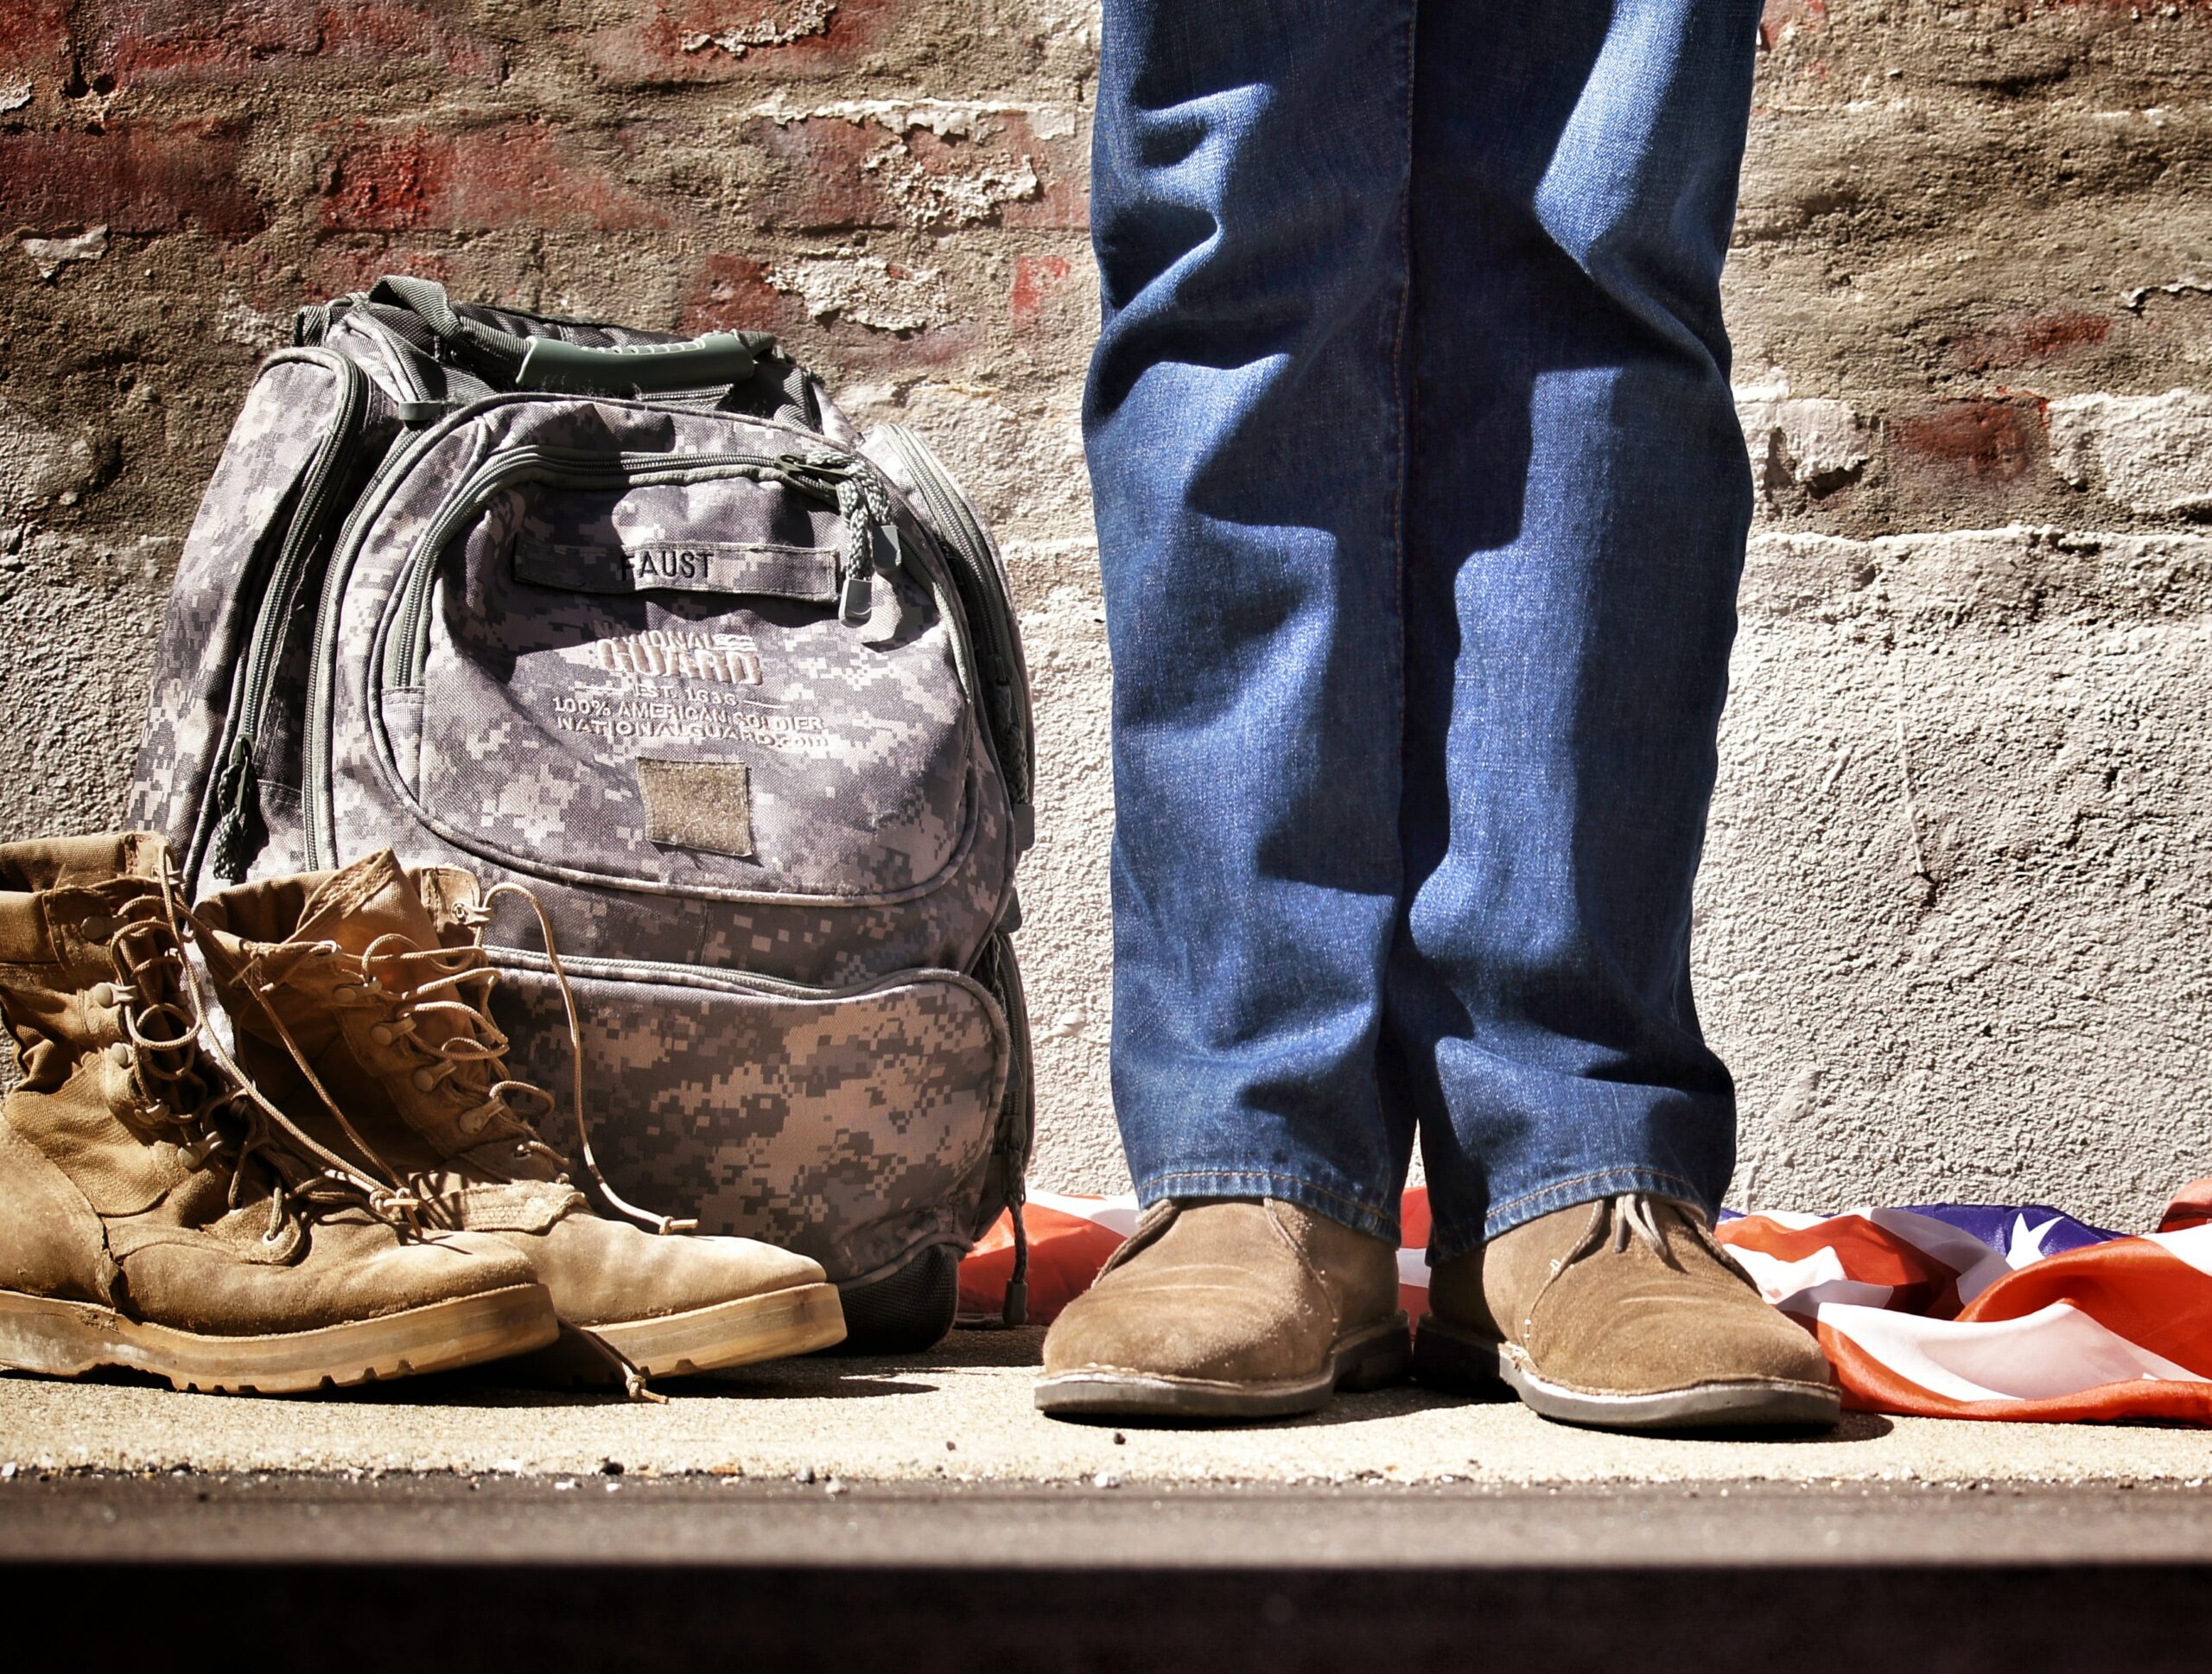 The legs of a man in jeans next to a camouflage rucksack and military boots.